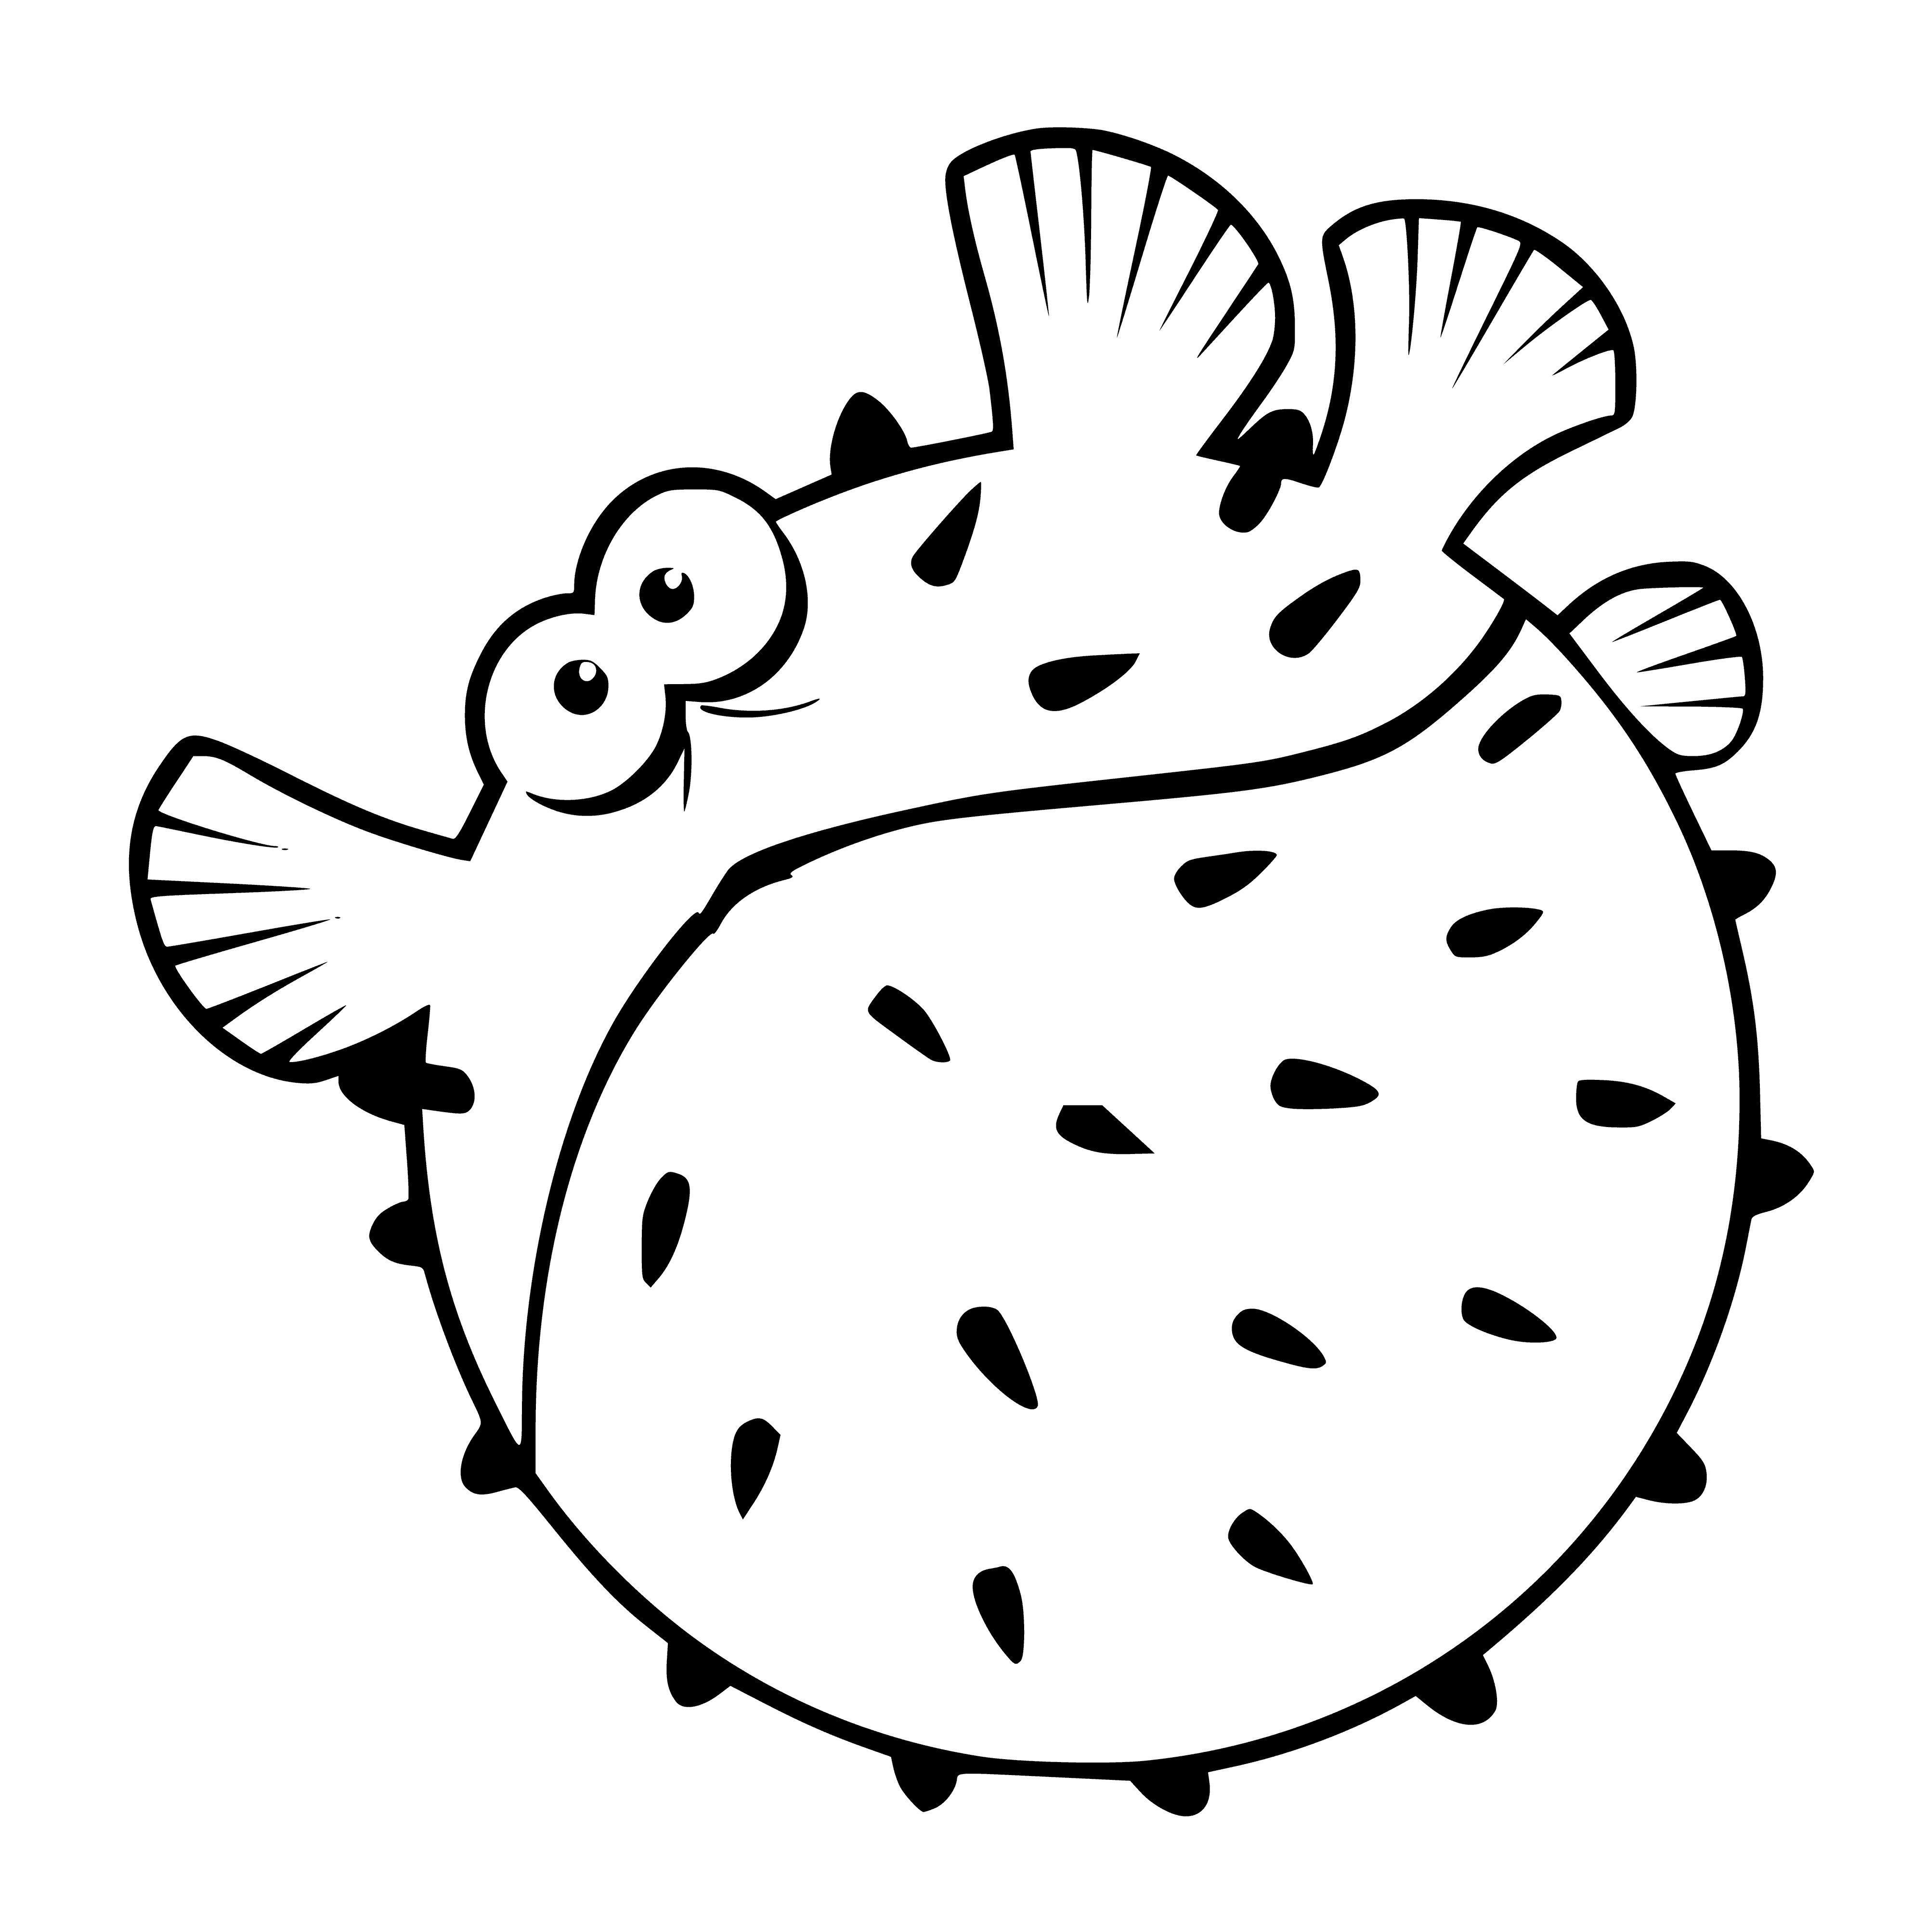 coloring page: Fish Nemo inside a polka dot ball suspended in air above blue, white stripes.